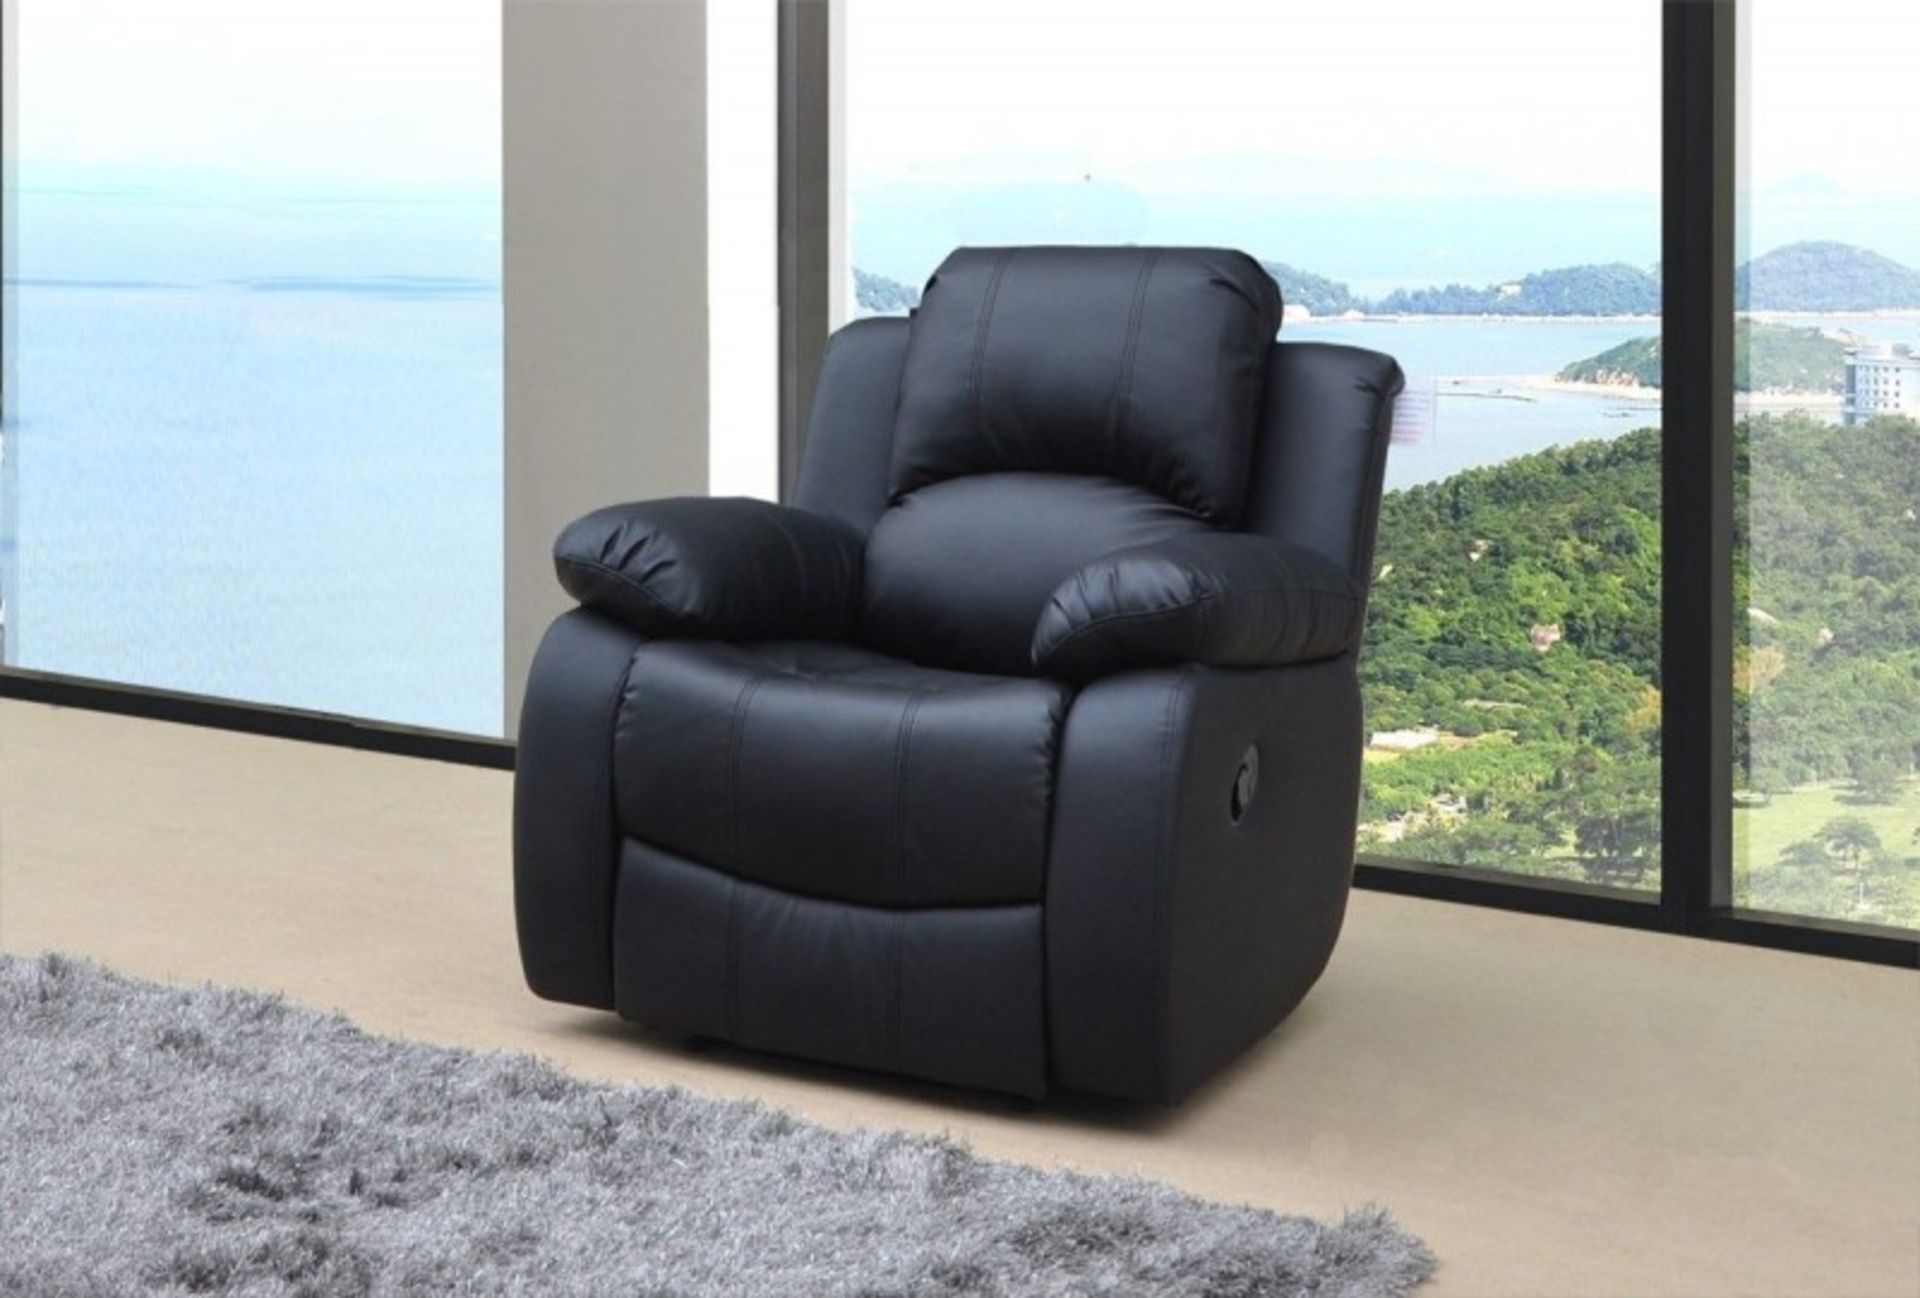 Venice 2 seater black top grade leather electric reclining sofa - Image 2 of 3